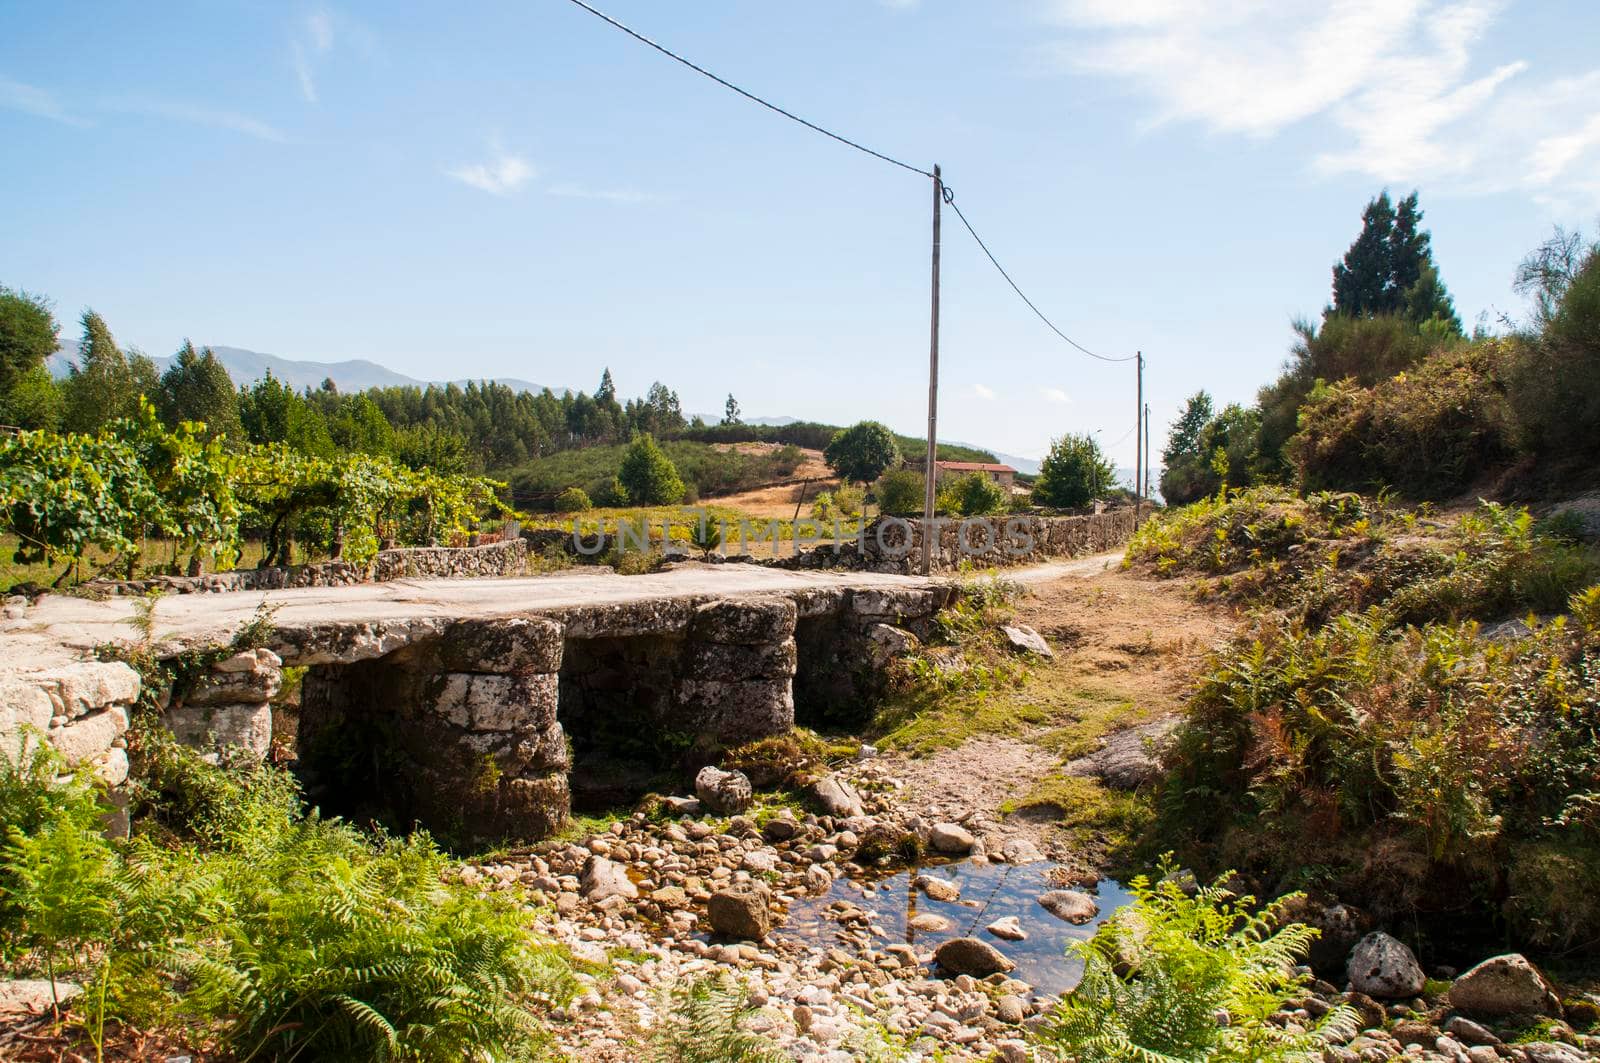 Bridge in the mountains in the north of Portugal.